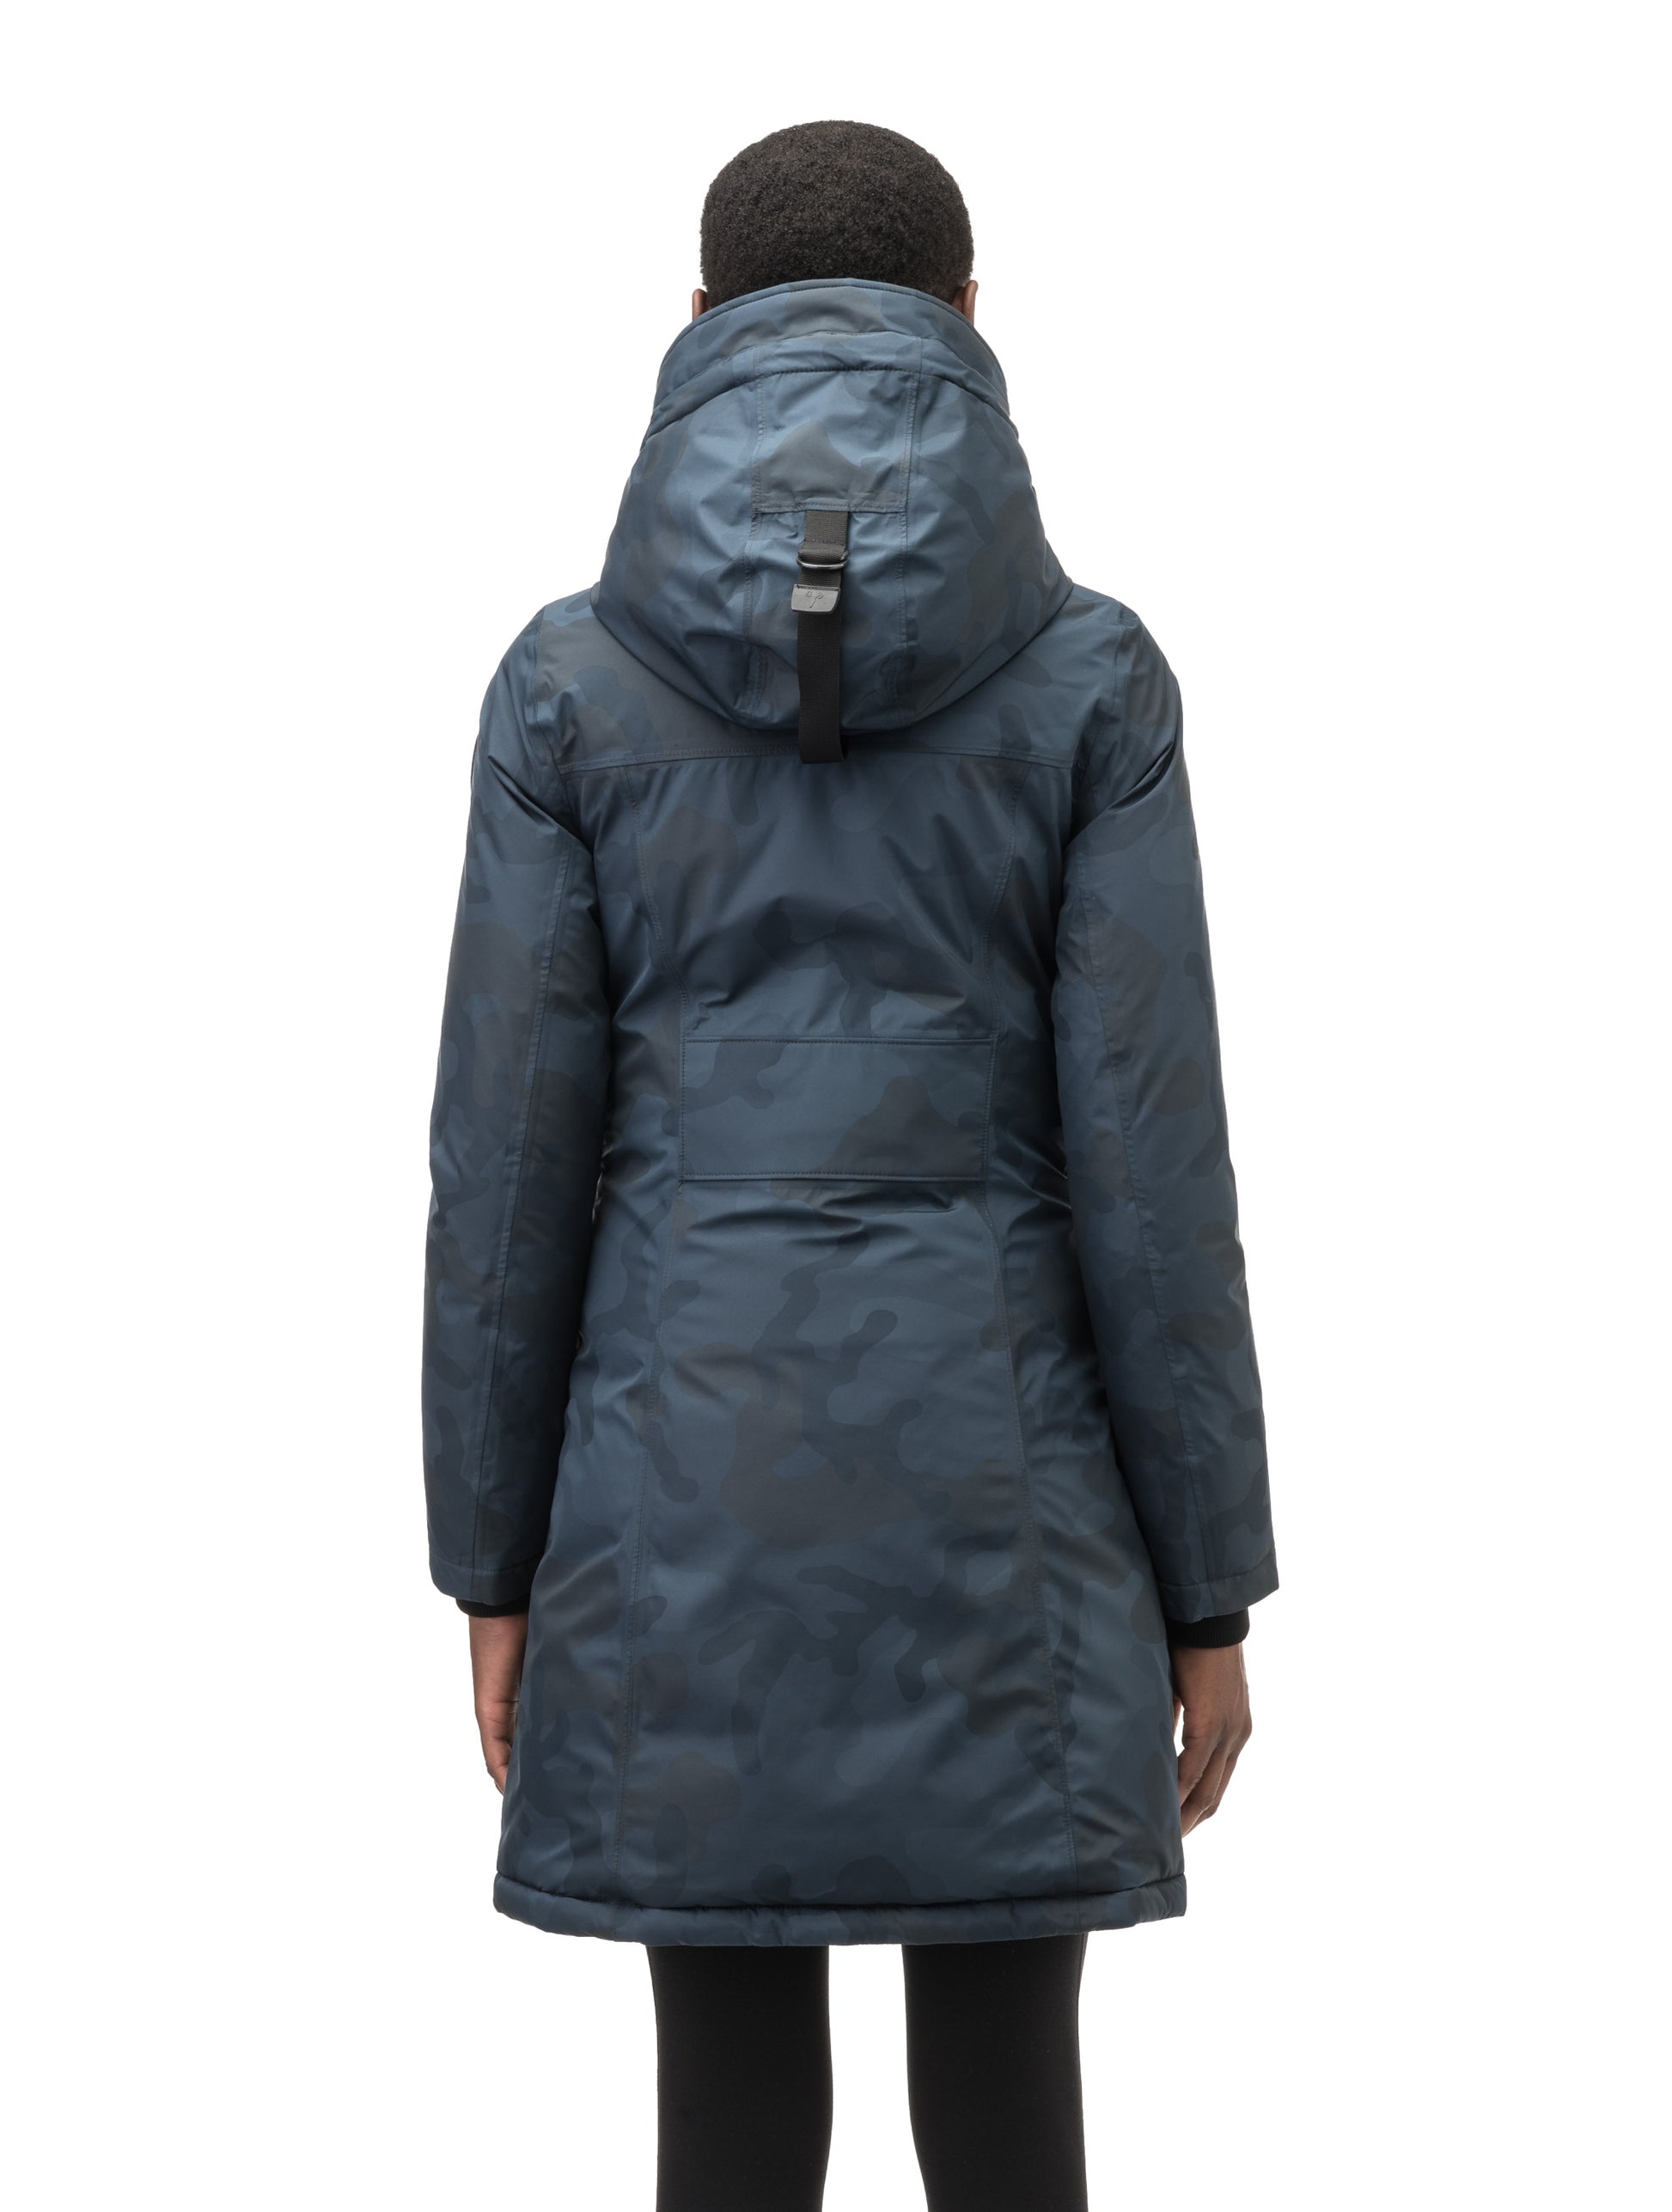 Ladies thigh length down-filled parka with non-removable hood and removable coyote fur trim in Navy Camo